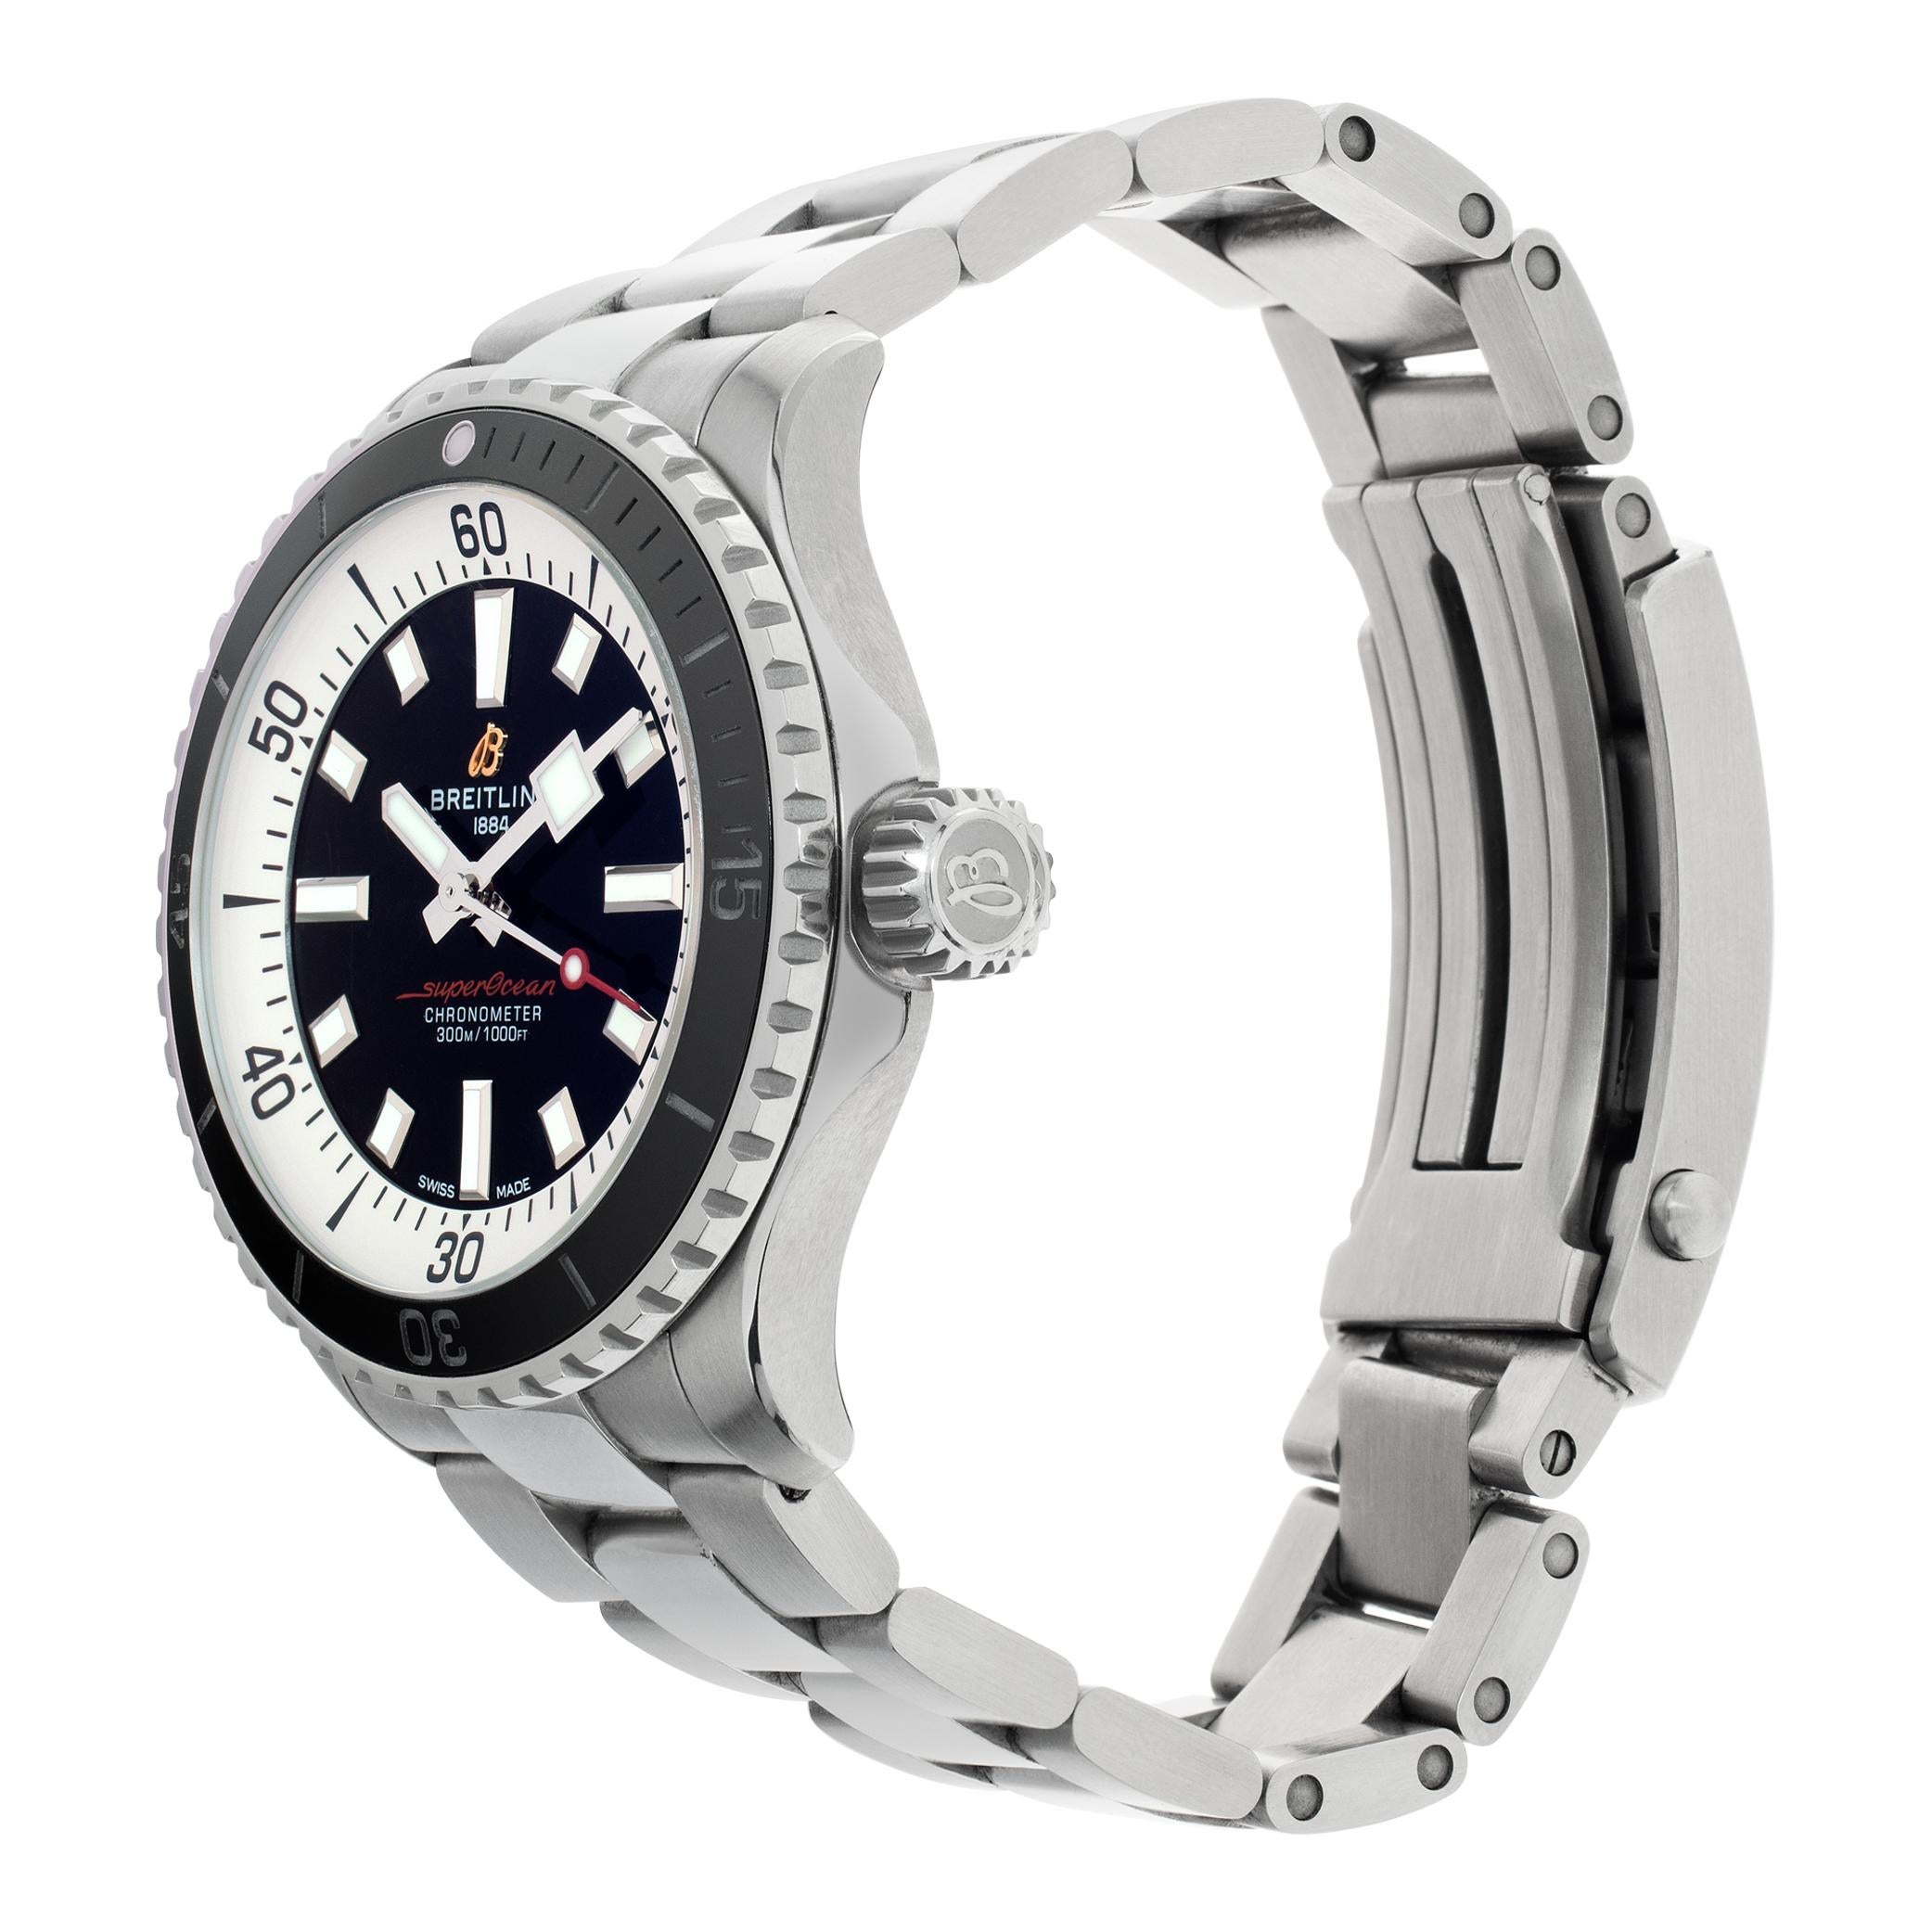 Breitling Super Ocean in stainless steel on link bracelet with black dial and rotating bezel. Auto w/ sweep seconds. 42 mm case size. Ref A17375. Circa 2020s. Fine Pre-owned Breitling Watch.

 Certified preowned Sport Breitling Super Ocean A17375